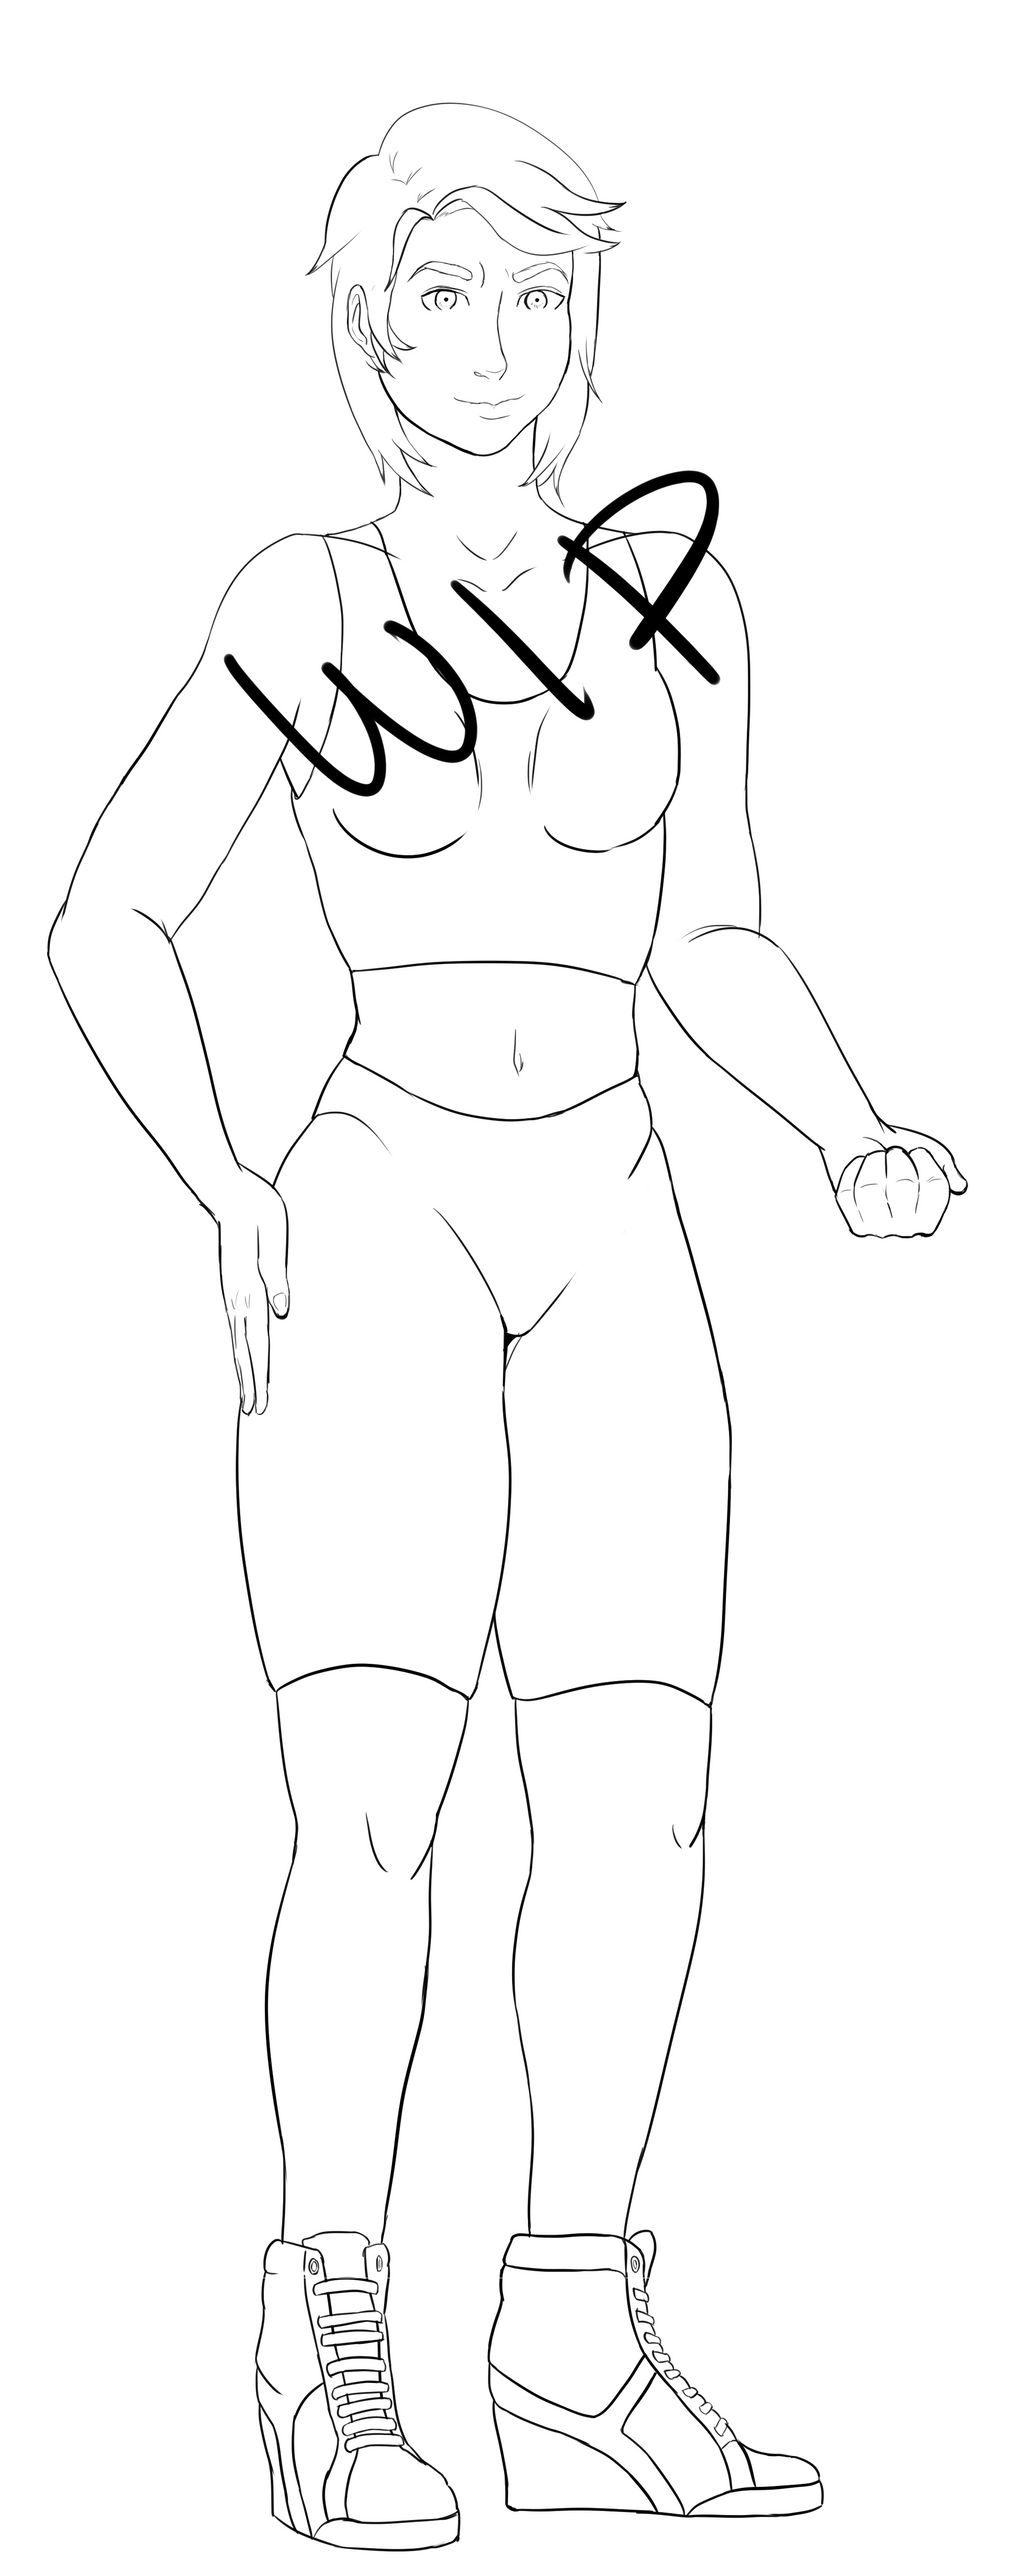 Workout girl (WIP)